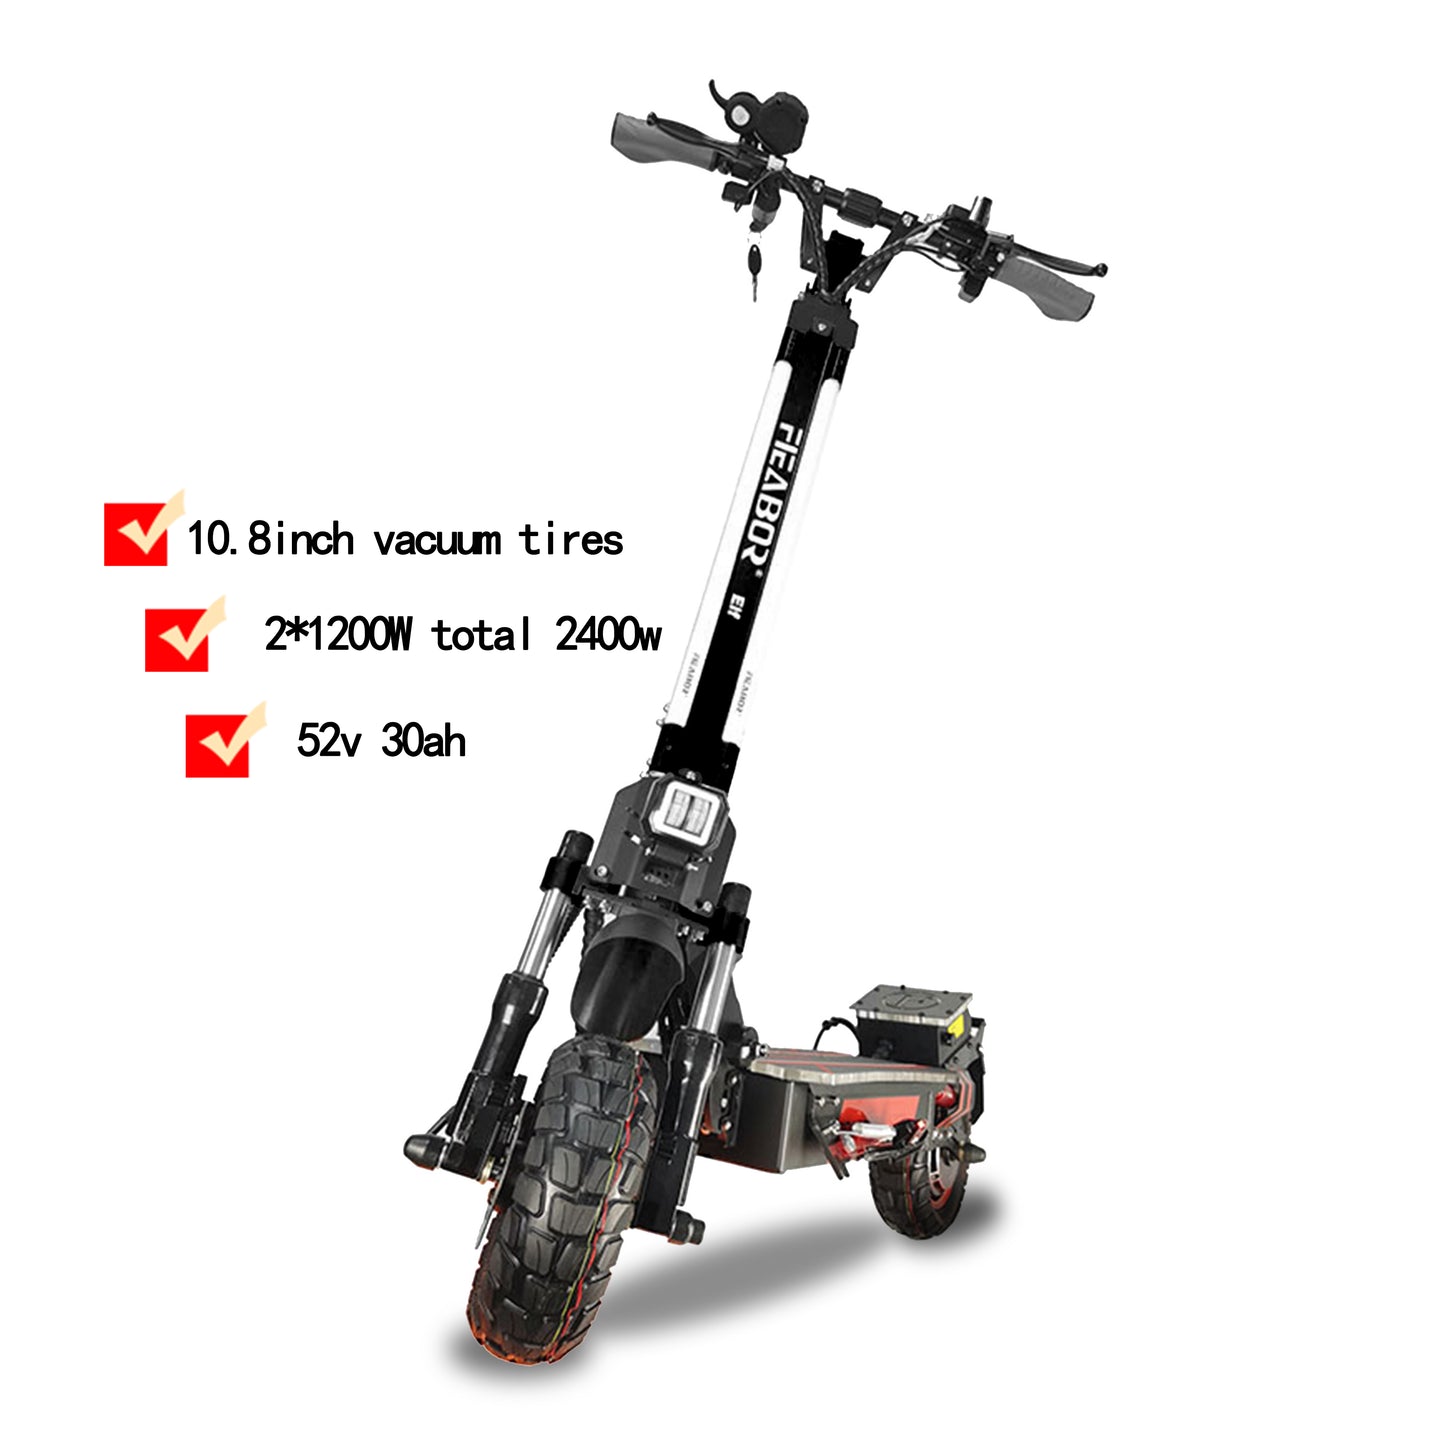 New! - 2400w Dual Motors Electric Scooter 52v